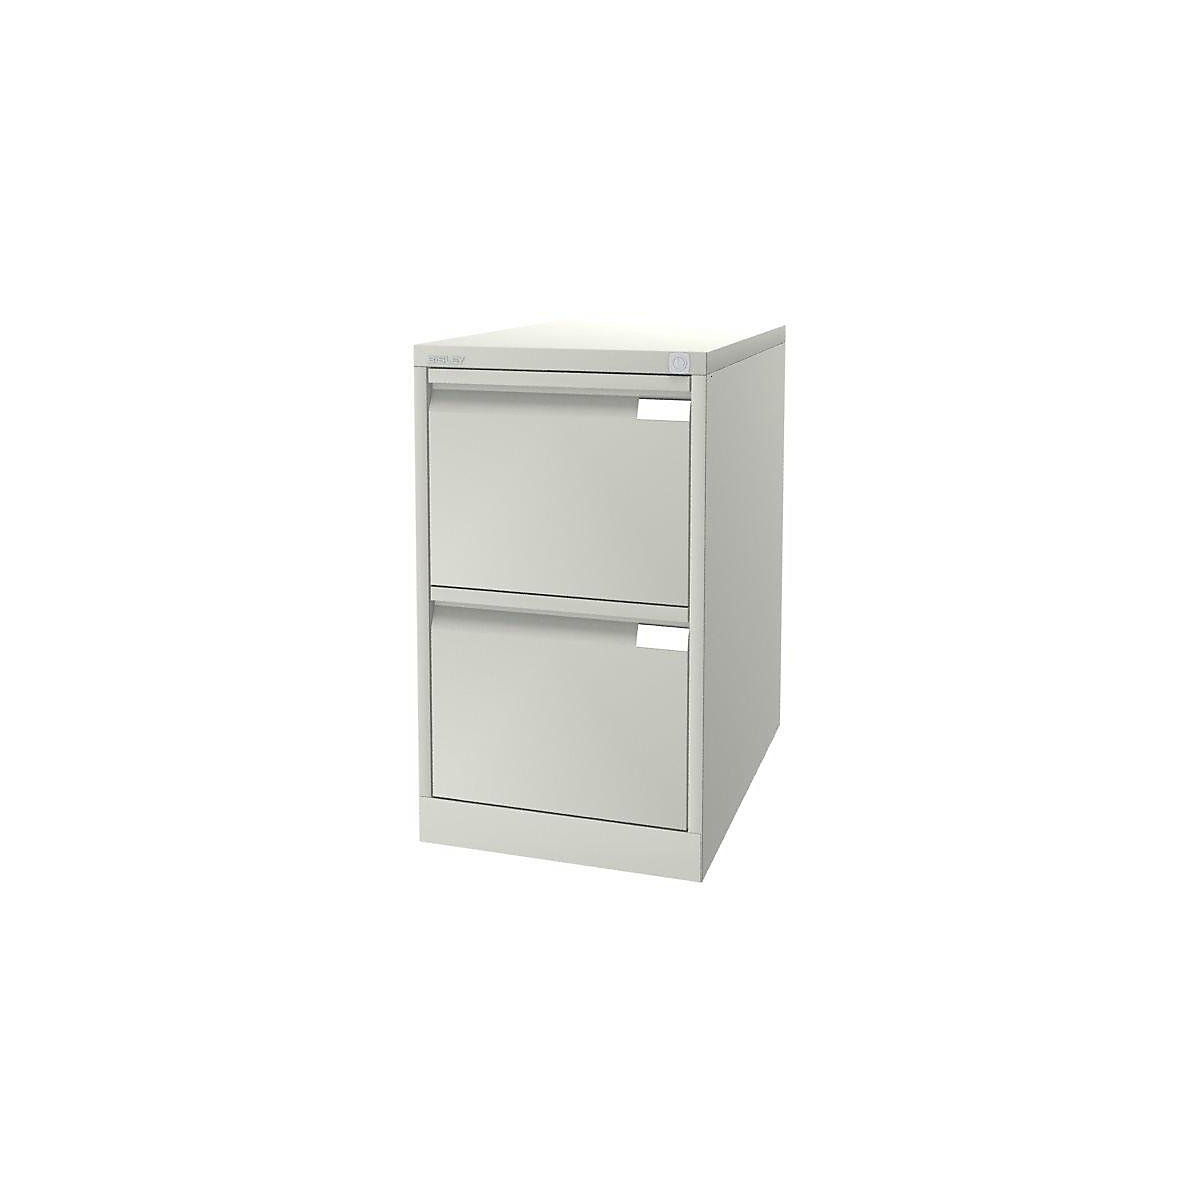 Suspension file cabinet, 1-track – BISLEY, 2 A4 drawers, pure white-17